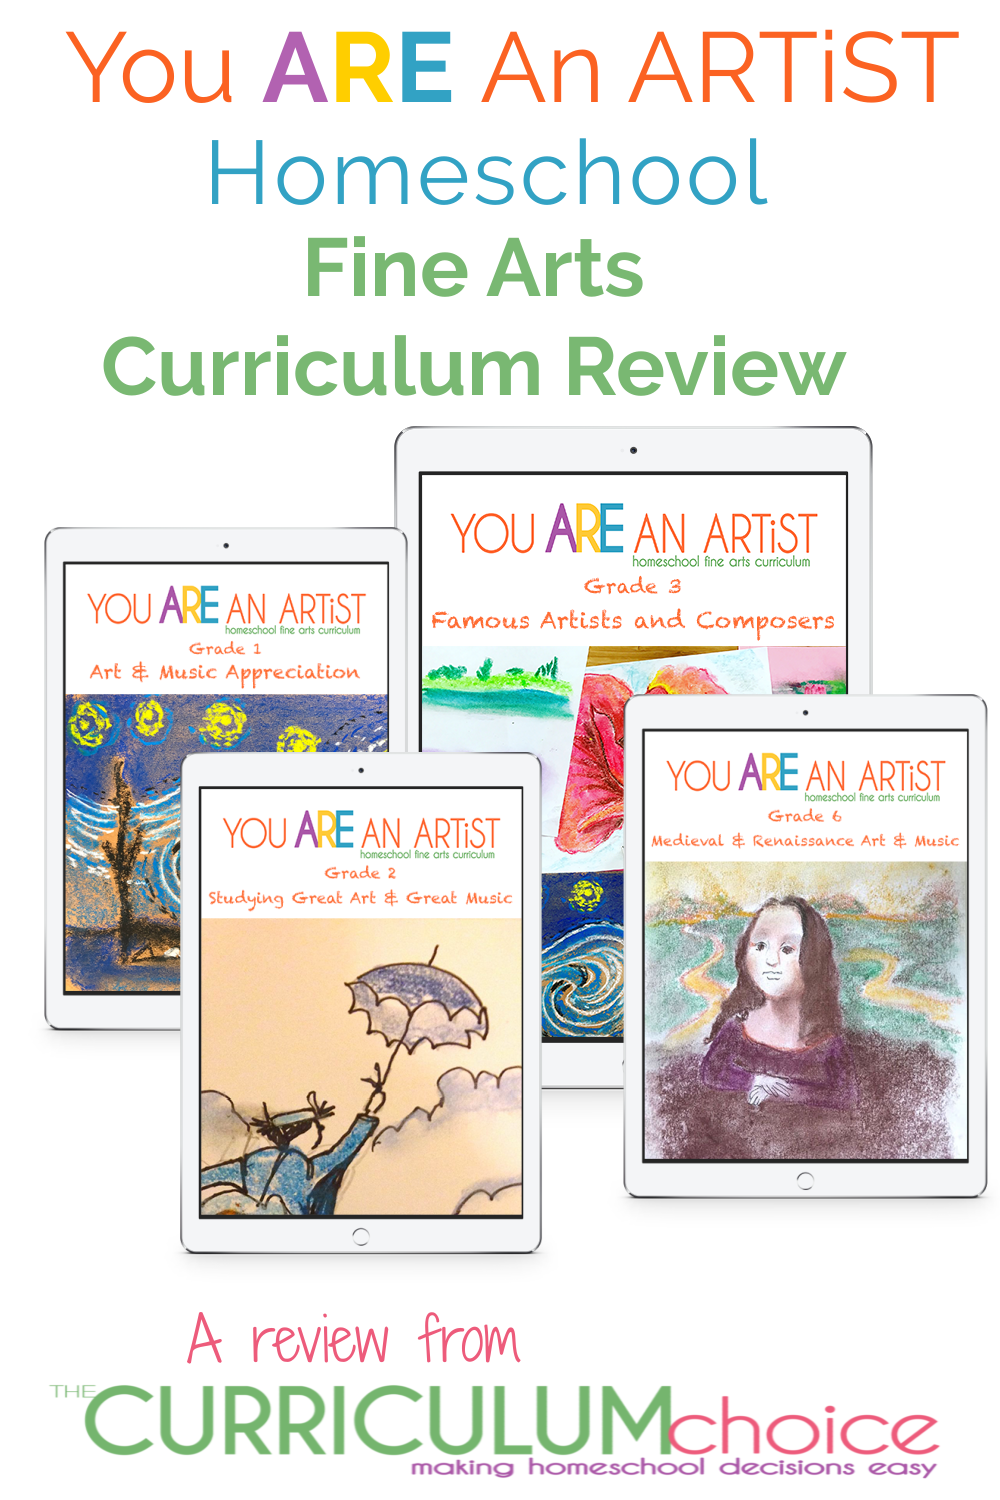 You ARE An ARTiST Fine Arts Curriculum offers art and music appreciation plans for grades K-12. Minimal prep plans for your fine arts needs! A review from The Curriculum Choice